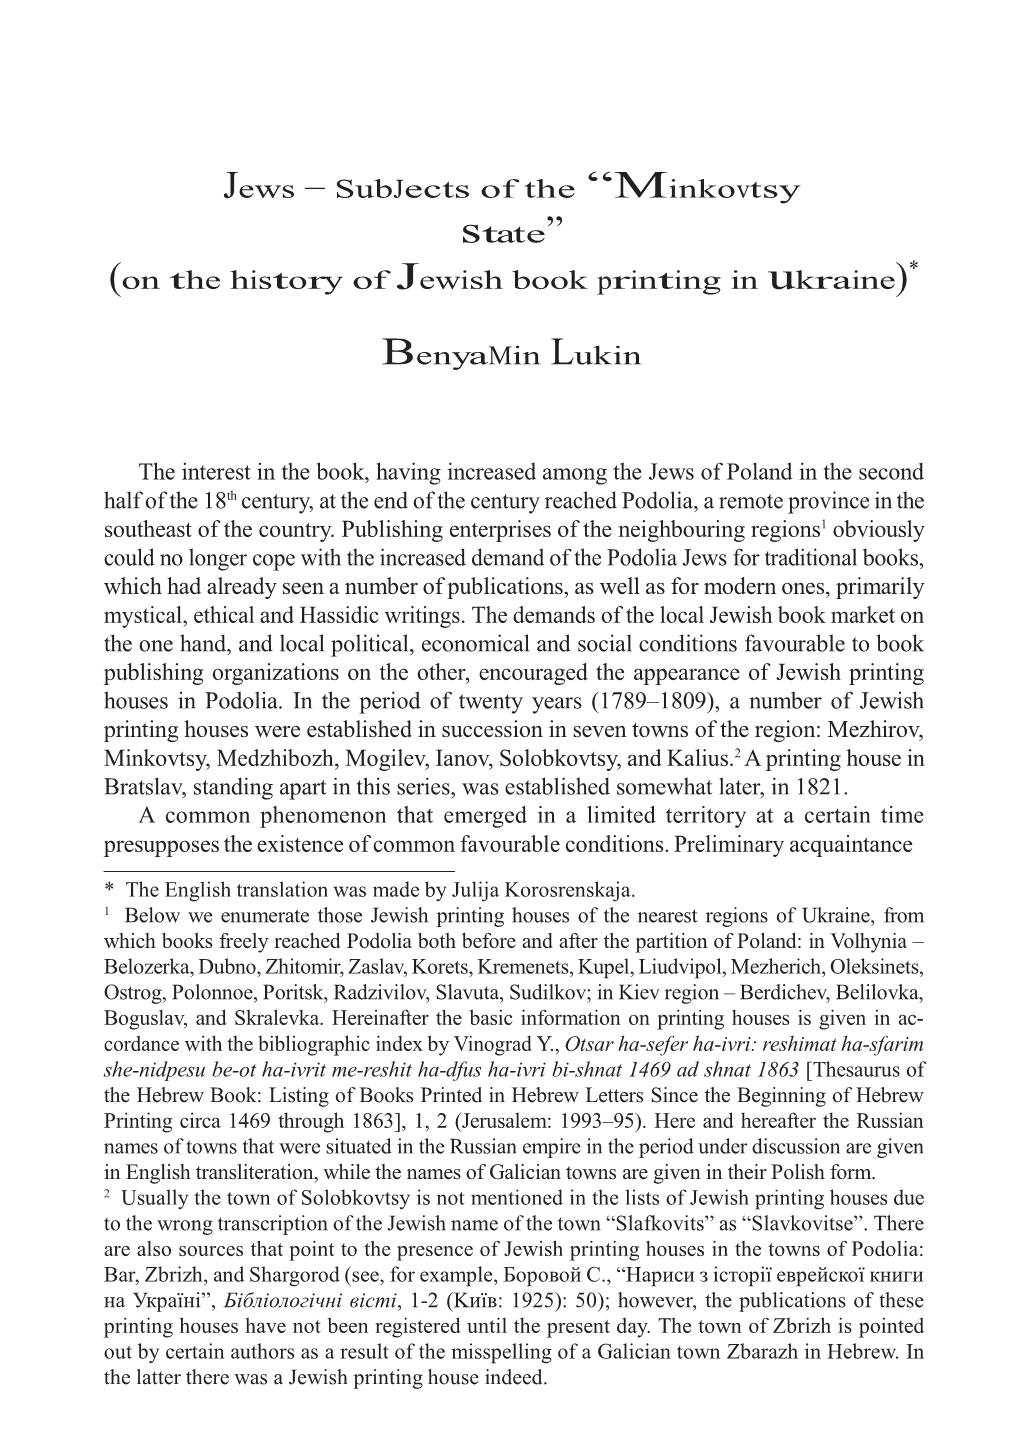 Jews – Subjects of the “Minkovtsy State” * (On the History of Jewish Book Printing in Ukraine)